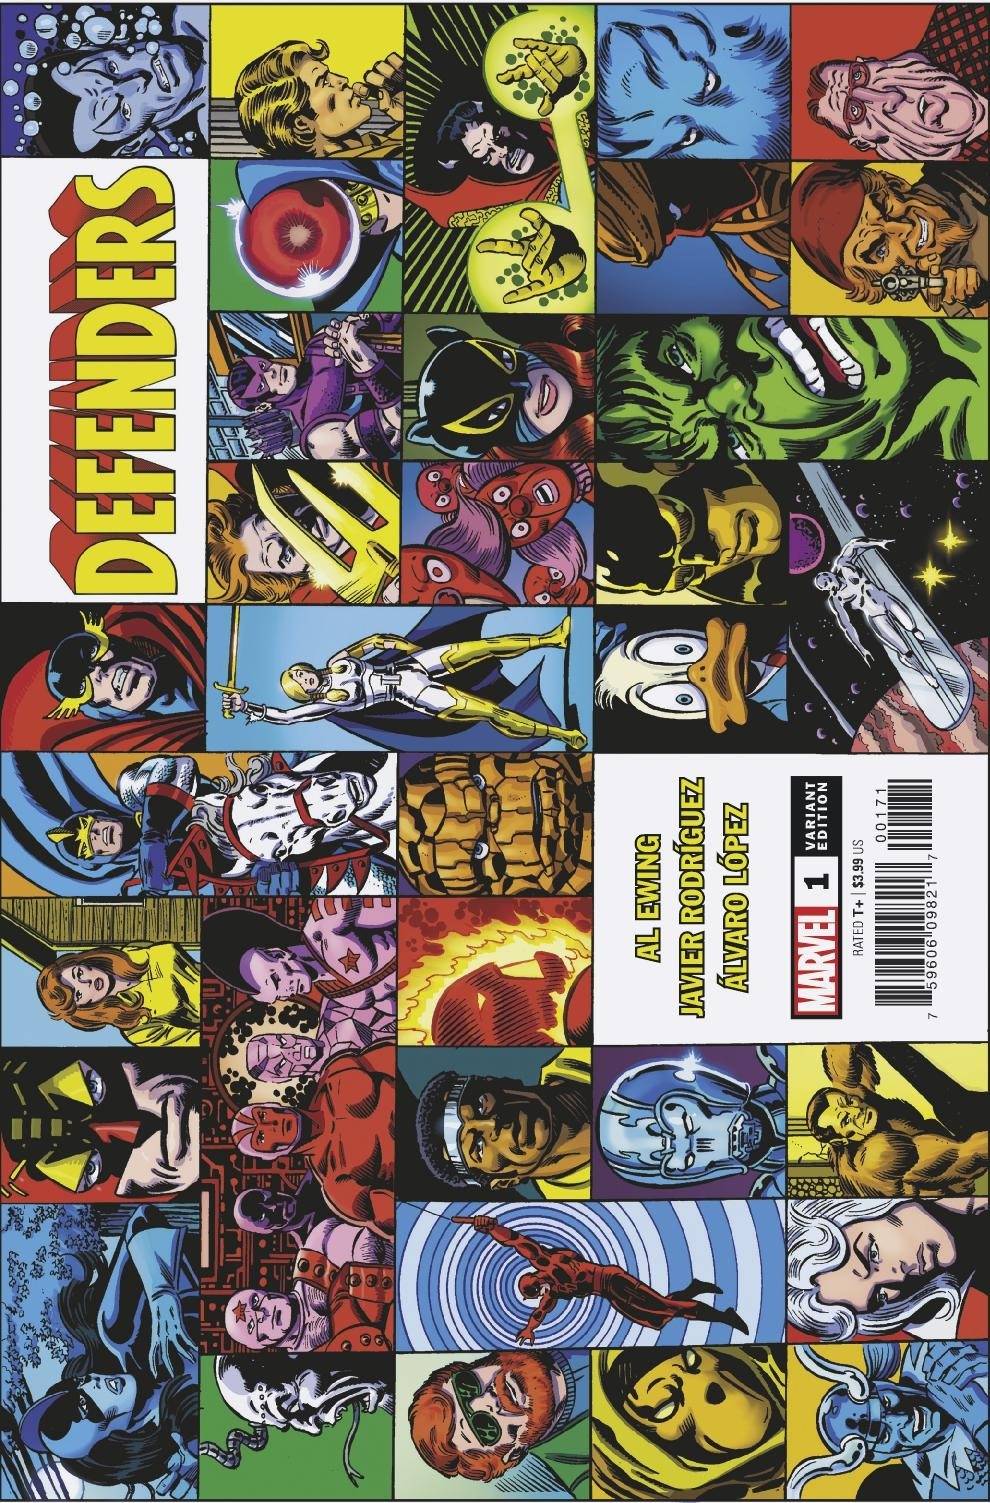 Defenders #1 1 for 25 Incentive George Perez